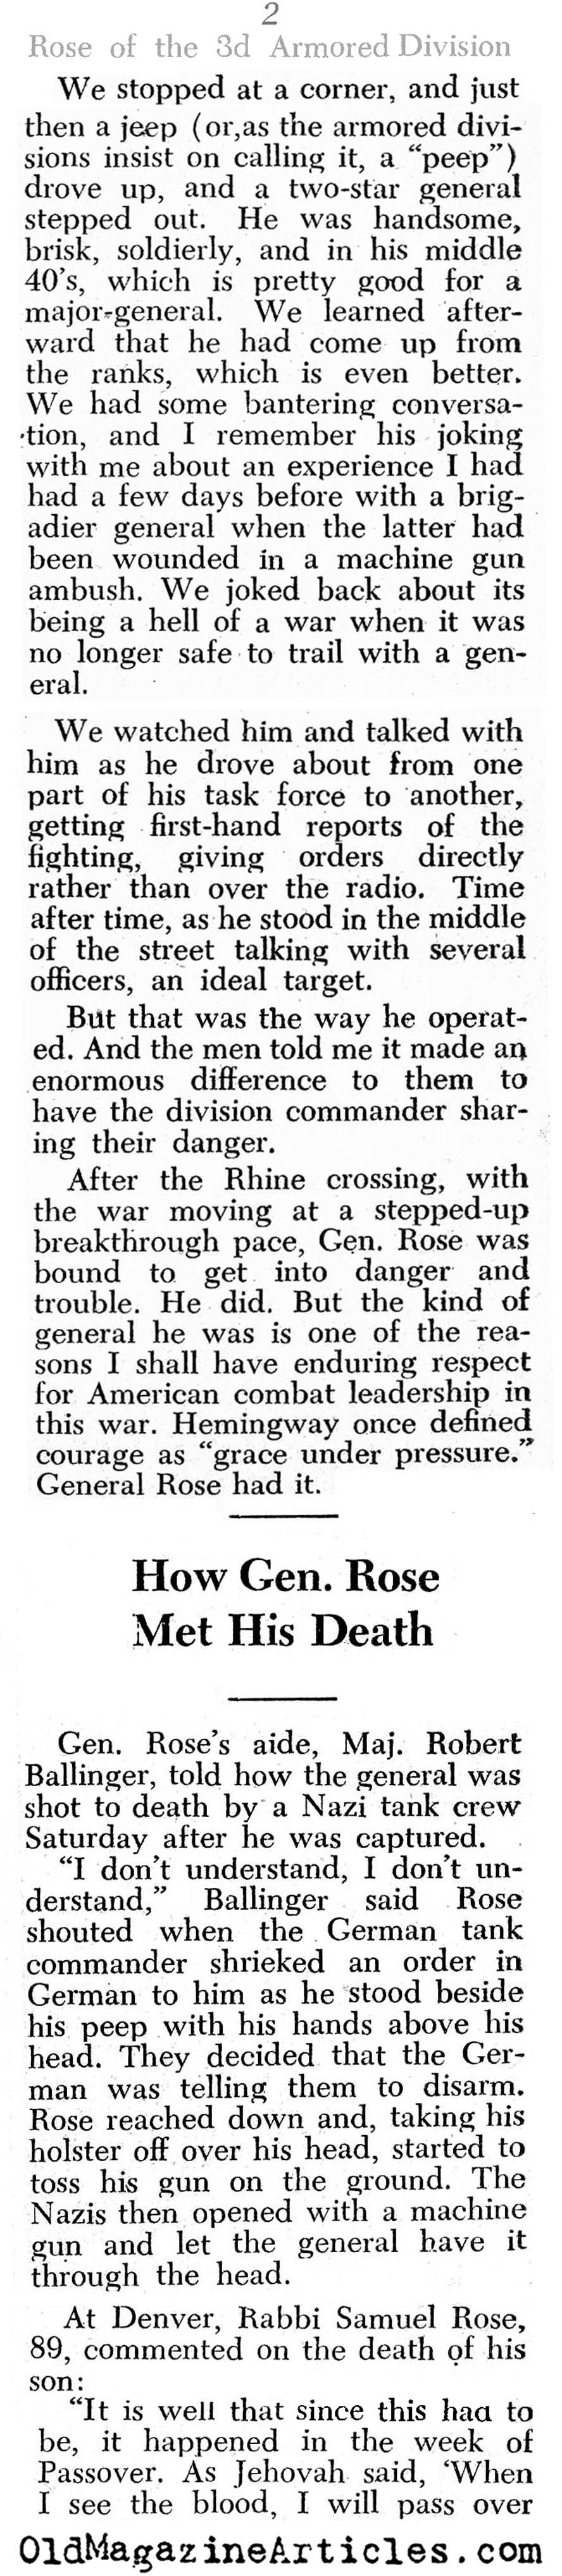 The Death of General Rose (PM Tabloid, 1945)